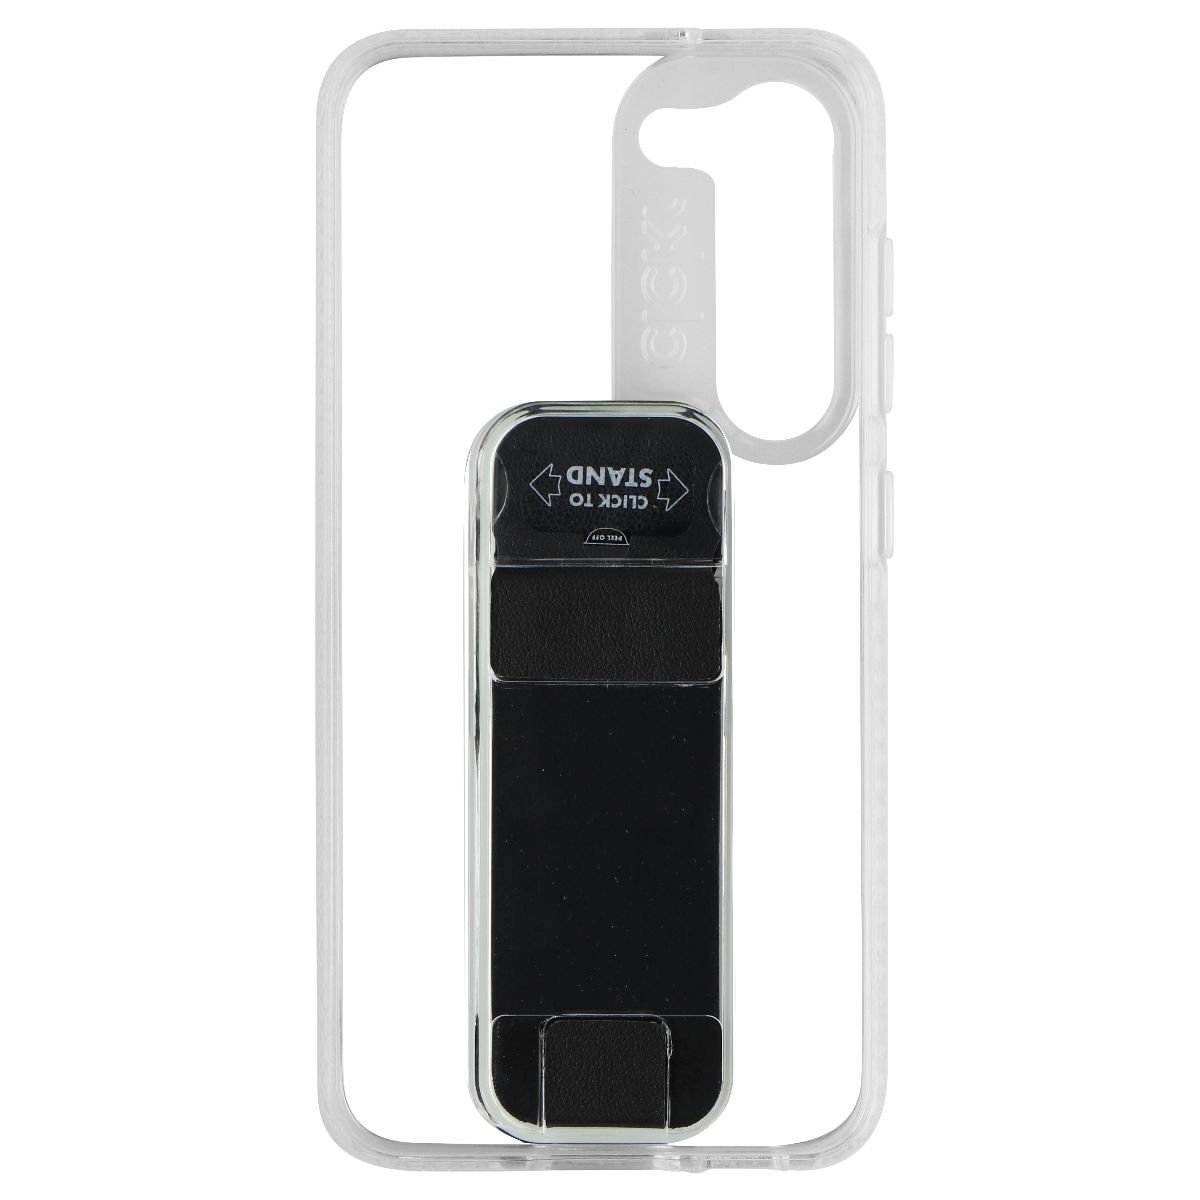 CLCKR Stand + Grip Series Case For Samsung Galaxy S23 - Clear/Black (Refurbished)